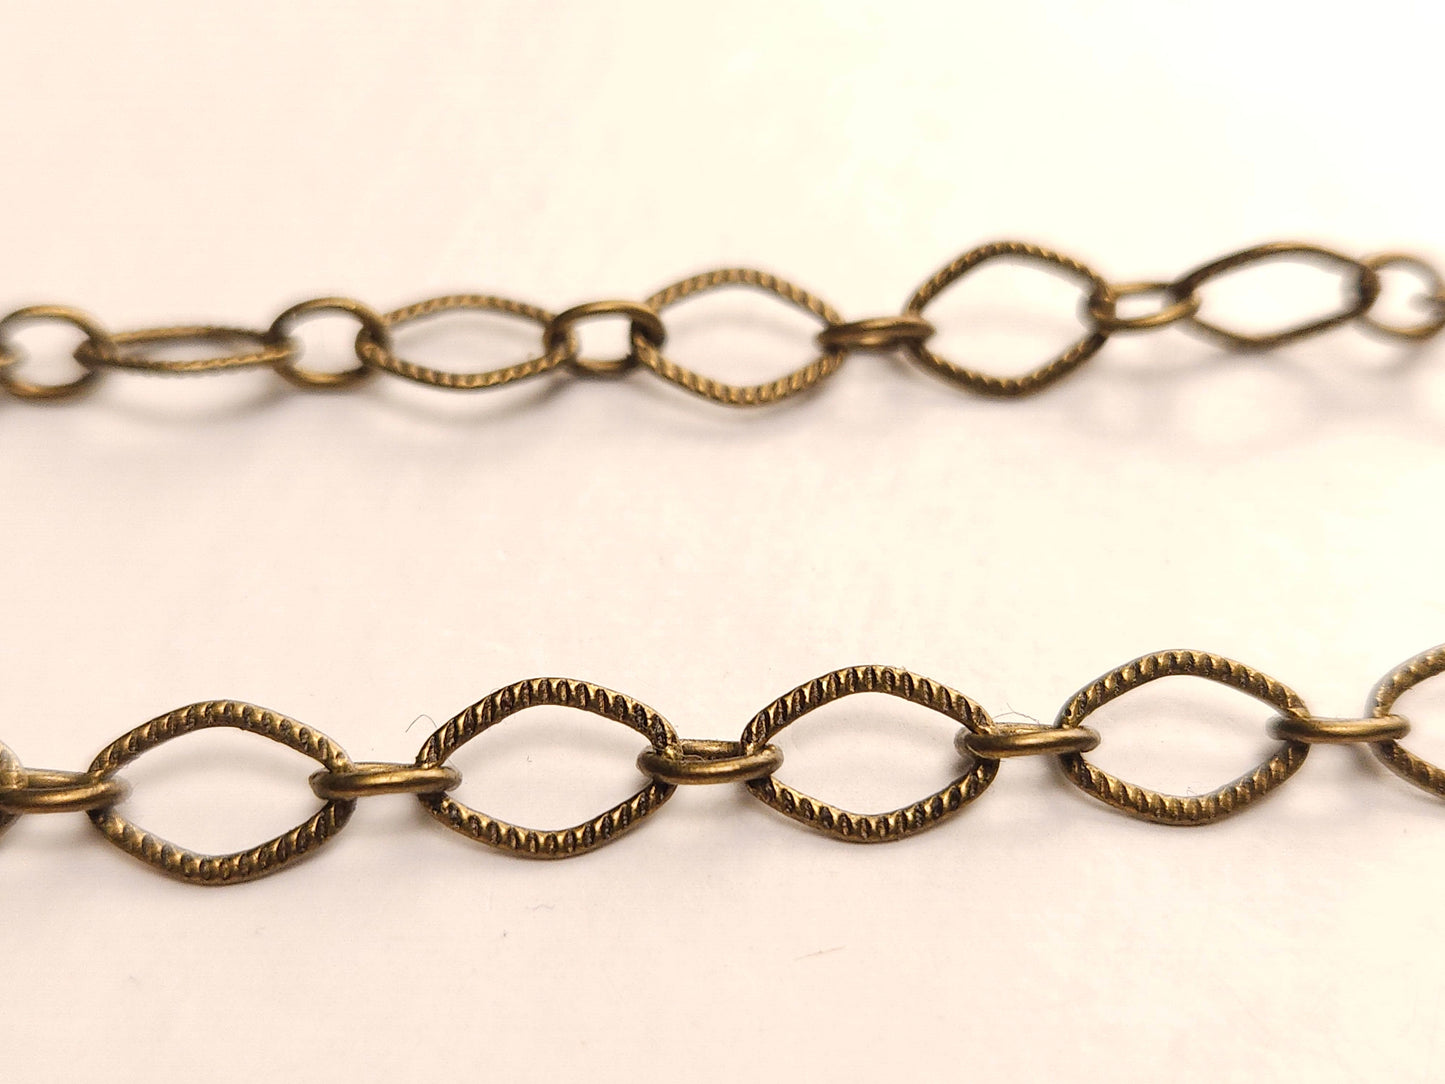 3 feet Black Gunmetal, Antique Brass chain for jewelry making supplies, oval link texture chain,sell by 1 yard, 36"